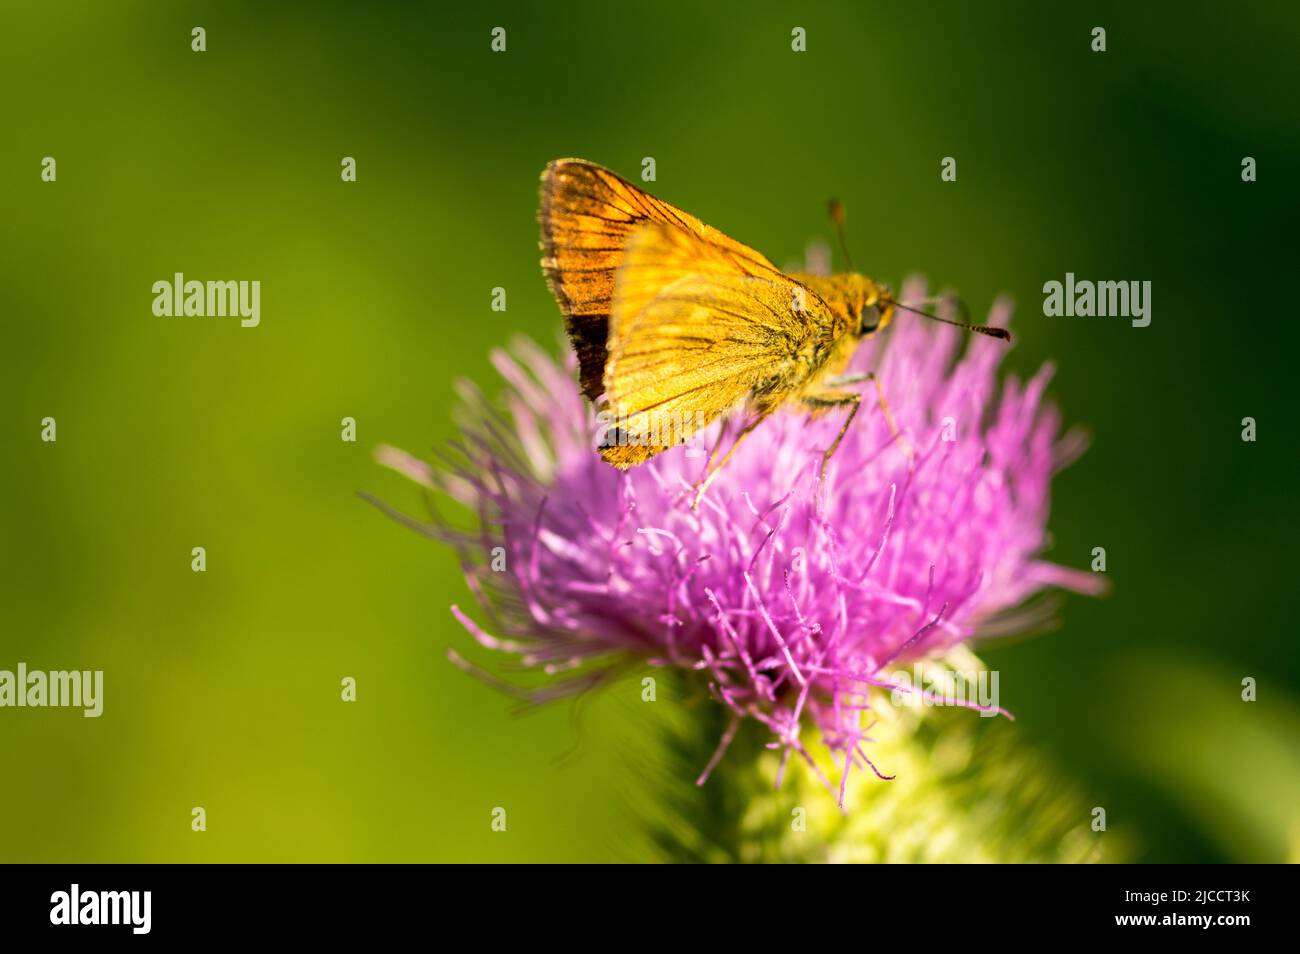 close-up of a butterfly of the genus Brown Skipper (Thymelicus indet) on a lilac colored thistle flower Stock Photo